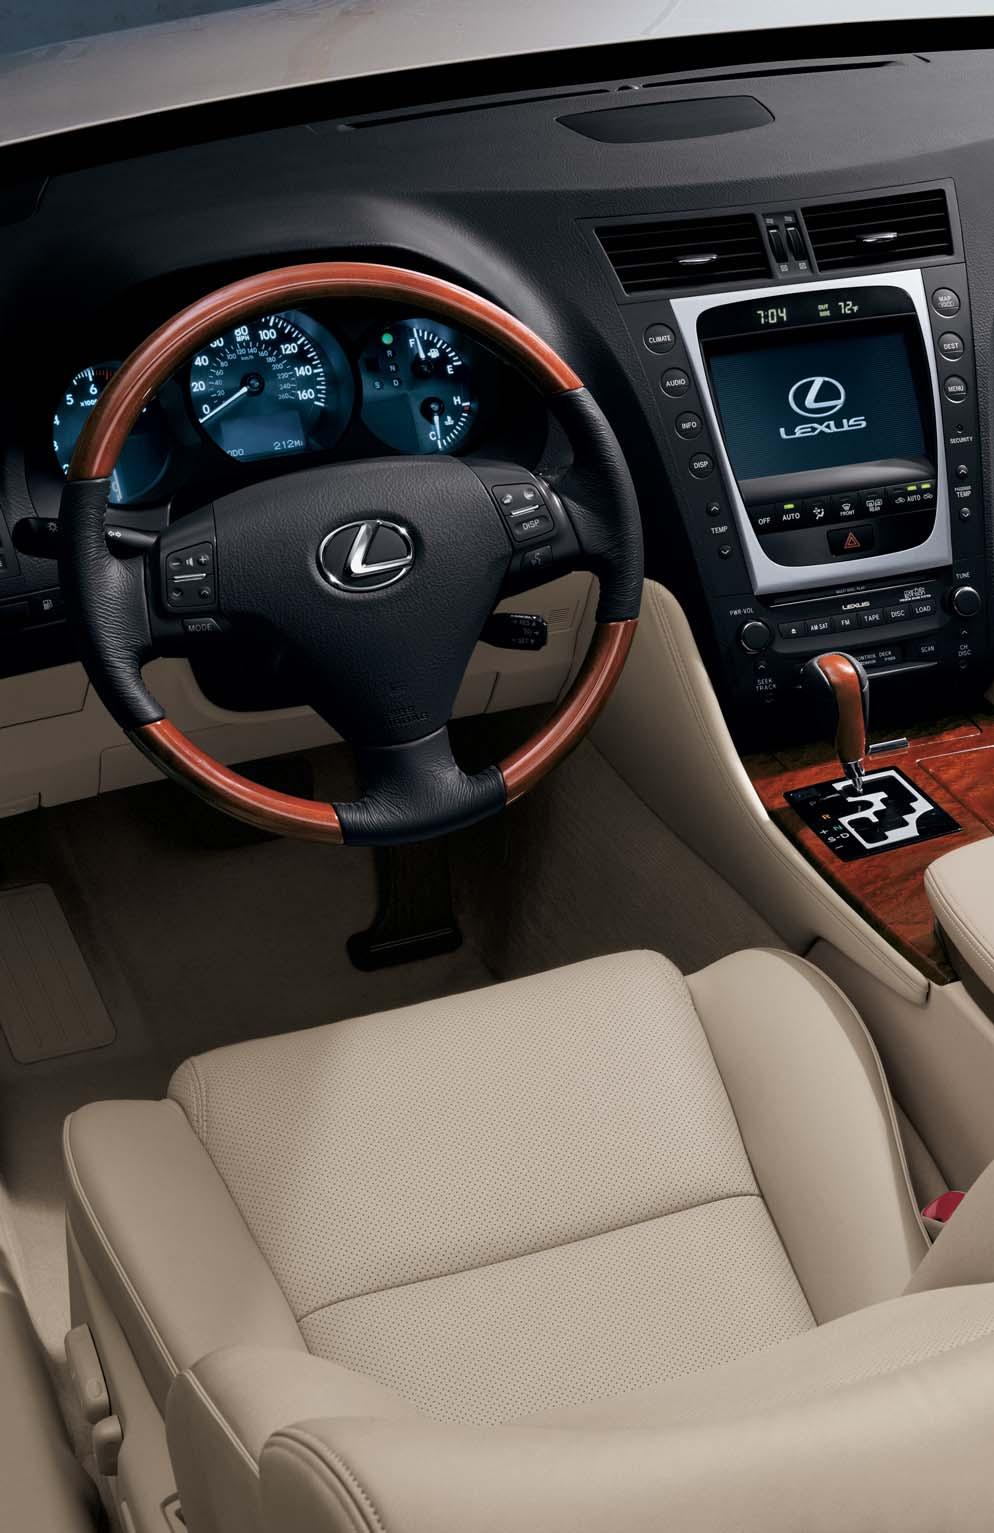 CERTIFIED PRE-OWNED FINANCING AND LEASING. Another innovative approach to customer satisfaction is the Lexus Certifi ed Pre-Owned fi nancing program.